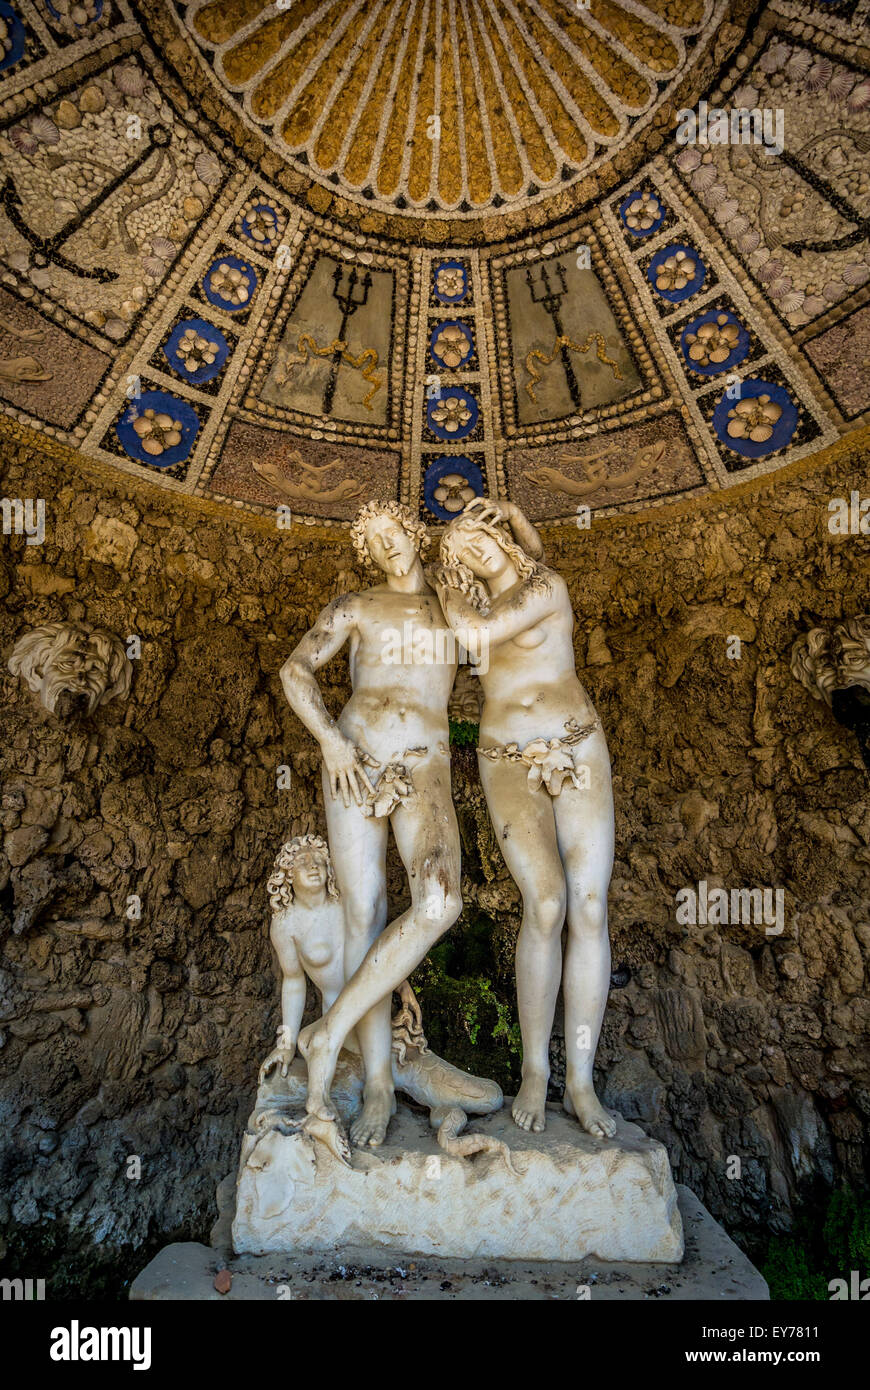 The Grotto of Adam and Eve which takes its name from the sculptures it contains by Michelangelo Noccherini. Boboli Gardens. Florence. Italy. Stock Photo